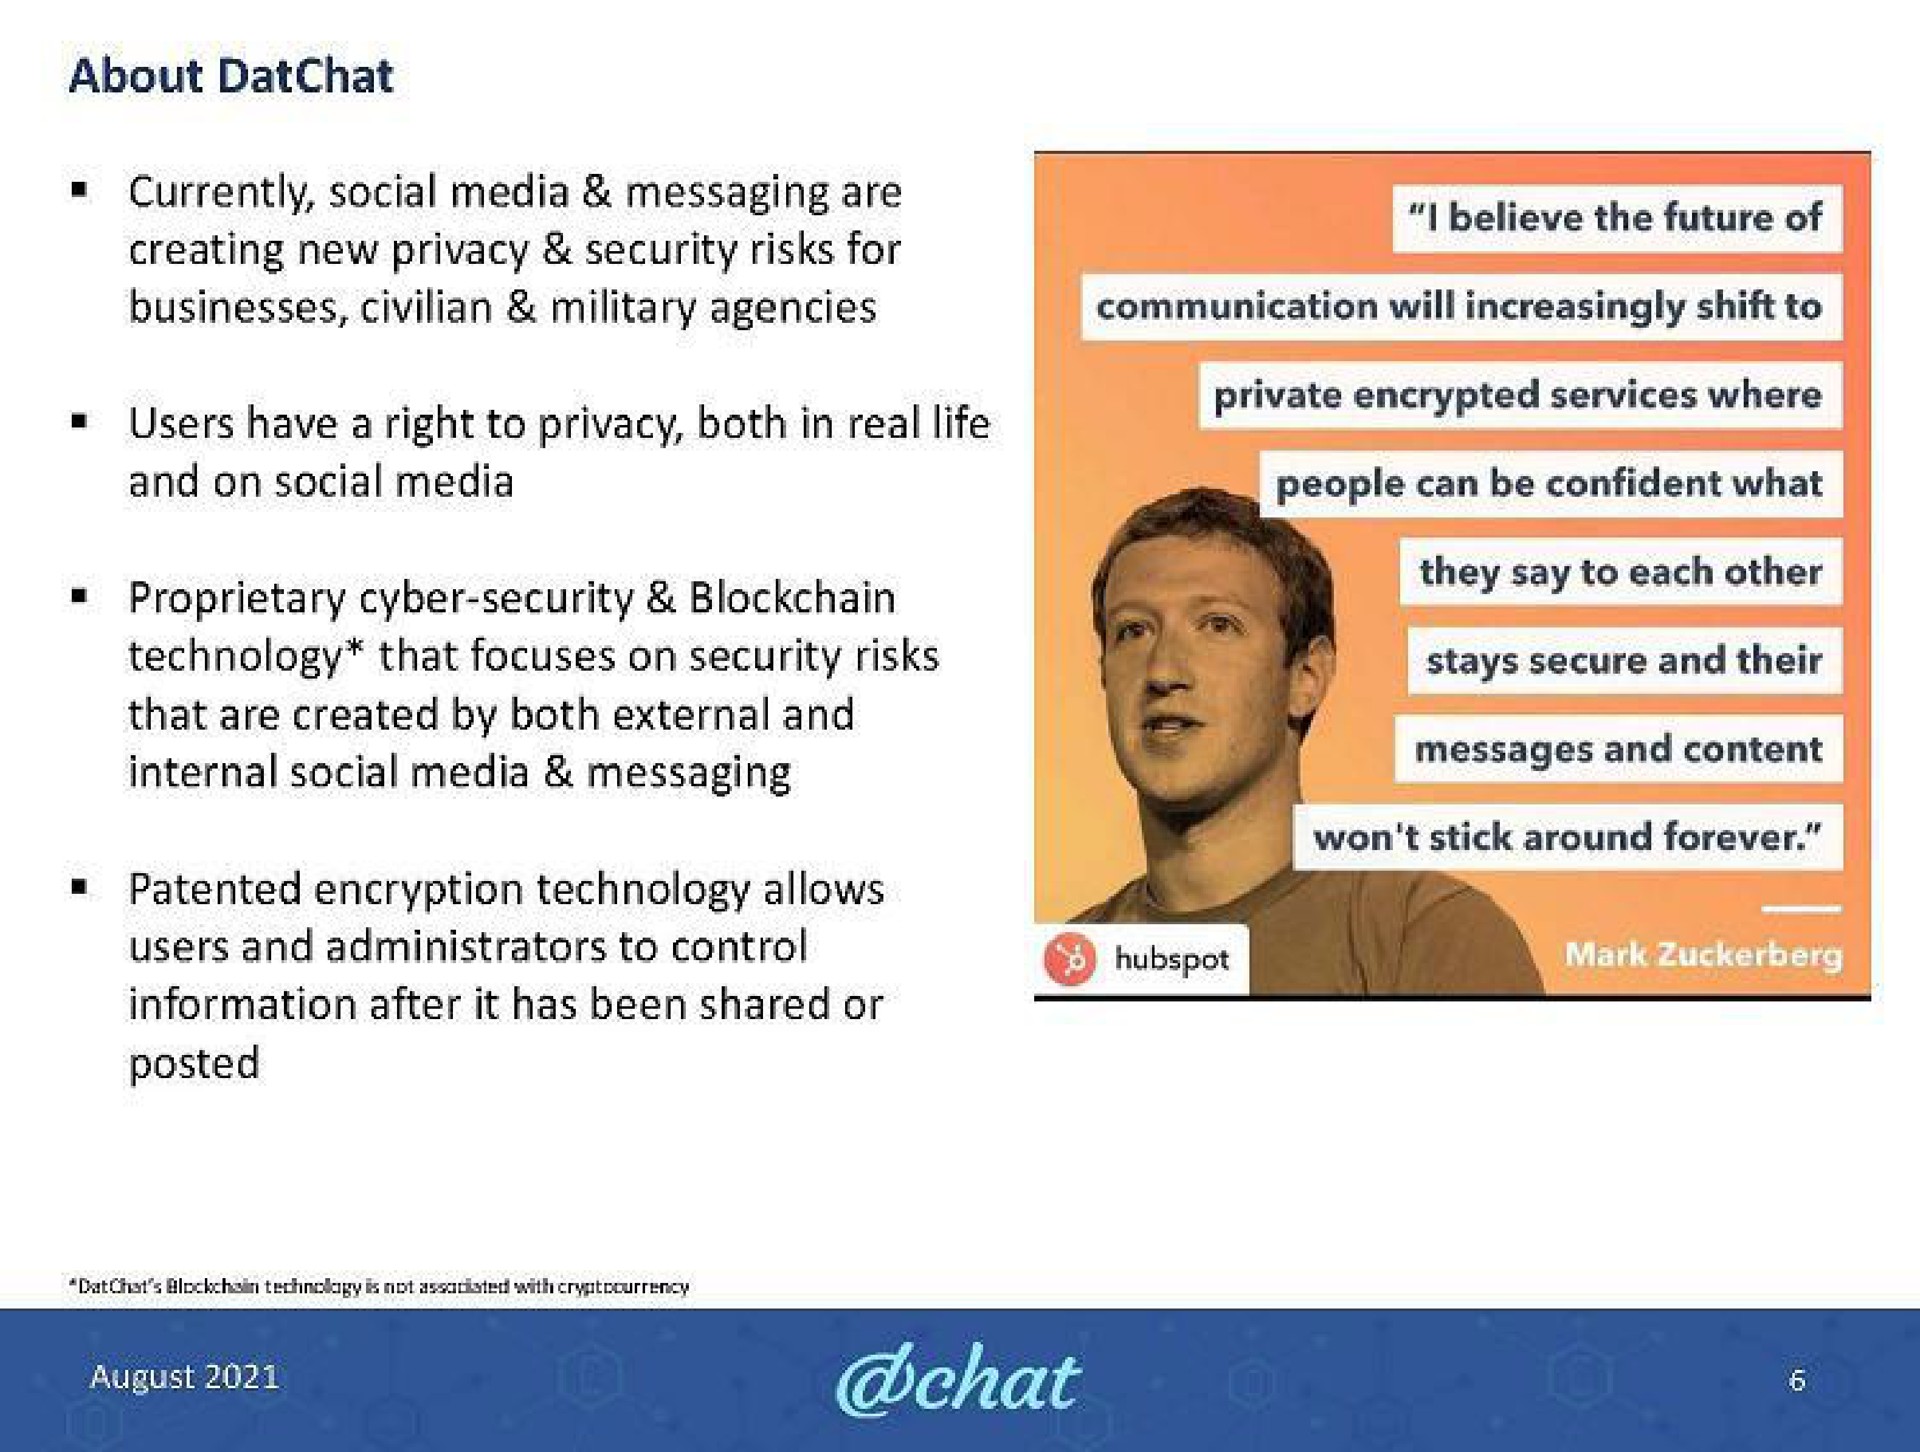 about currently social media messaging are creating new privacy security risks for businesses civilian military agencies users have a right to privacy both in real life and on social media proprietary security that are created by both external and internal social media messaging patented encryption technology allows users and administrators to control posted to other each a on they people can be confident what say soy nos he content | DatChat